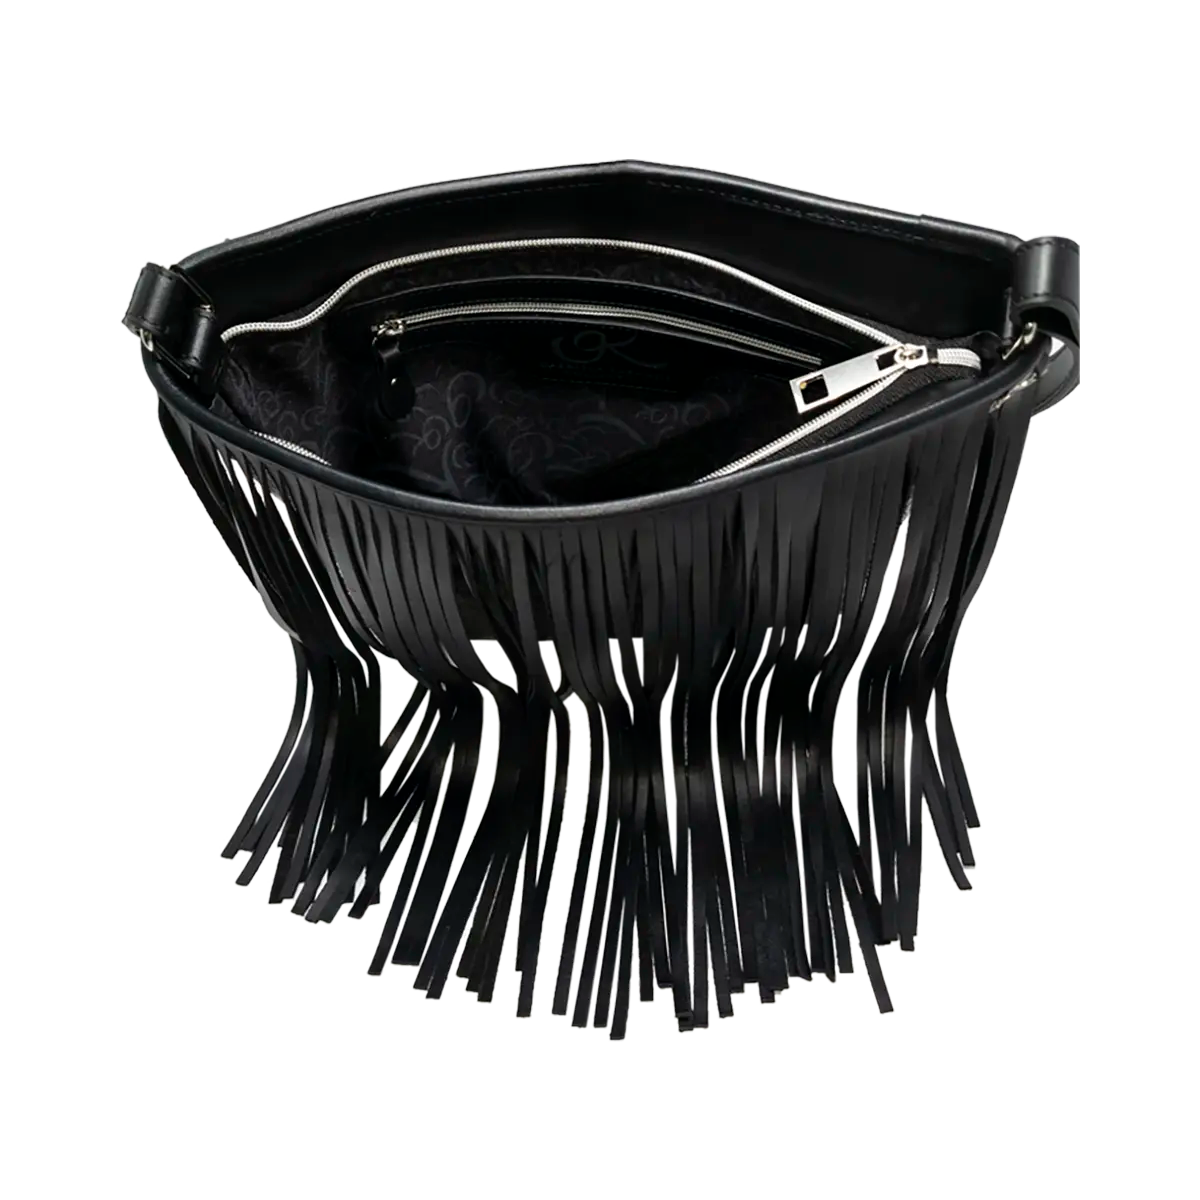 large black leather crossbody bag with fringe. Fashion accessory for women in San Diego, CA.